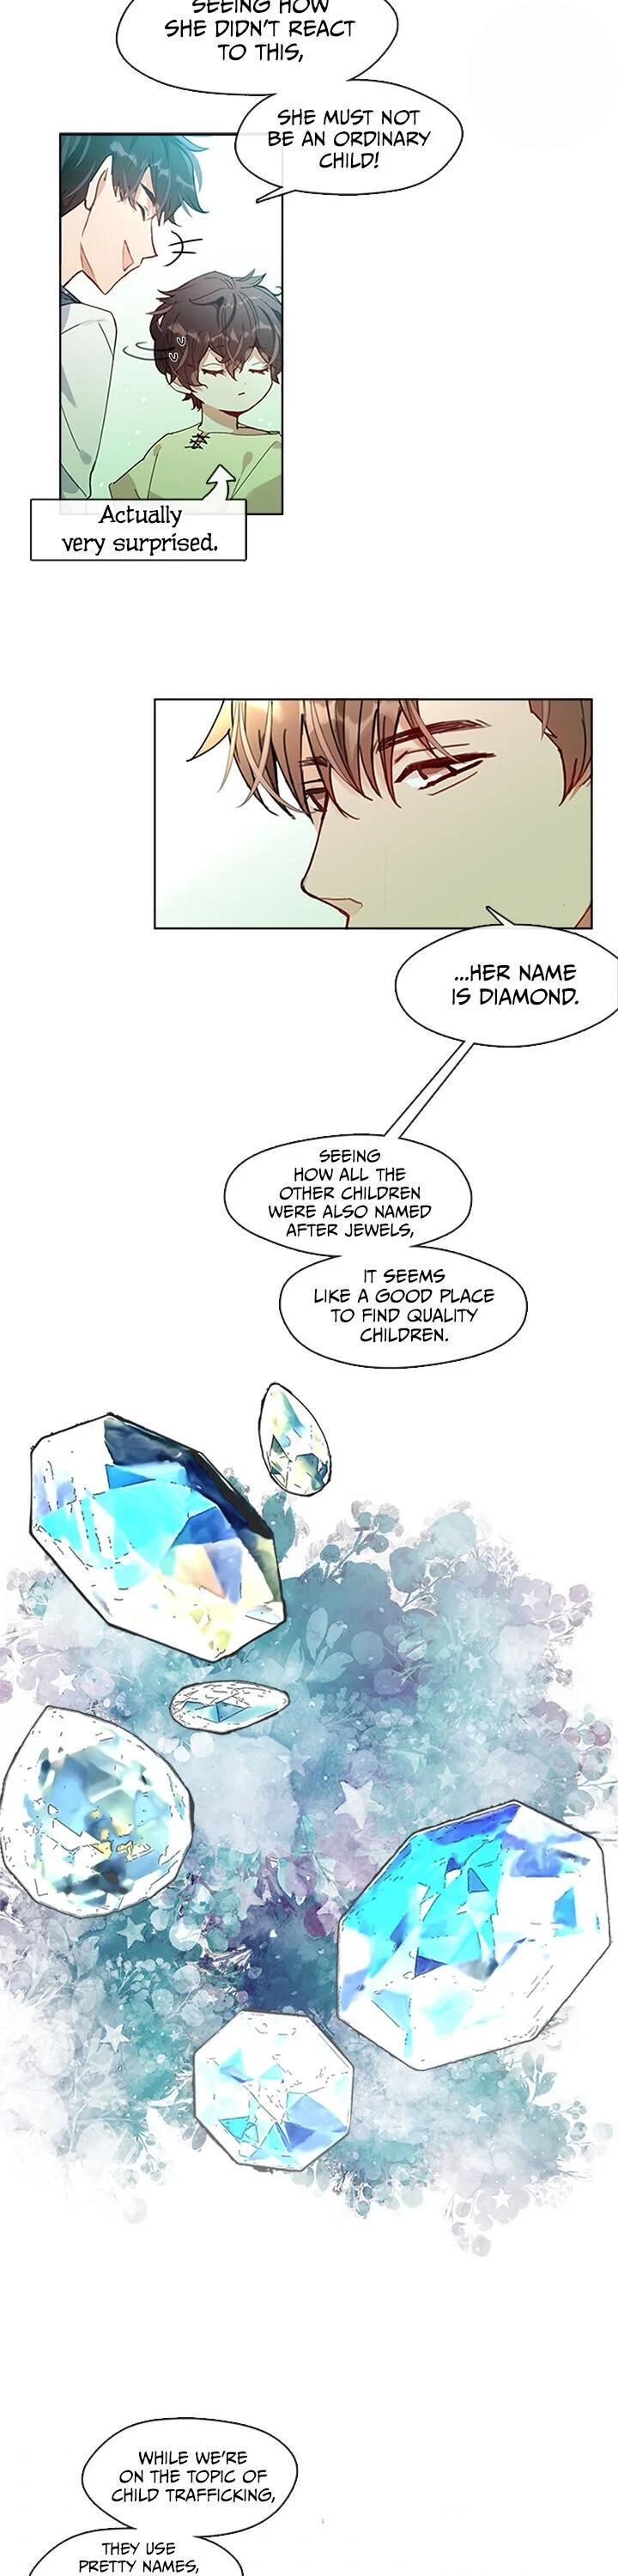 Devoted to Diamond chapter 1 - Page 16